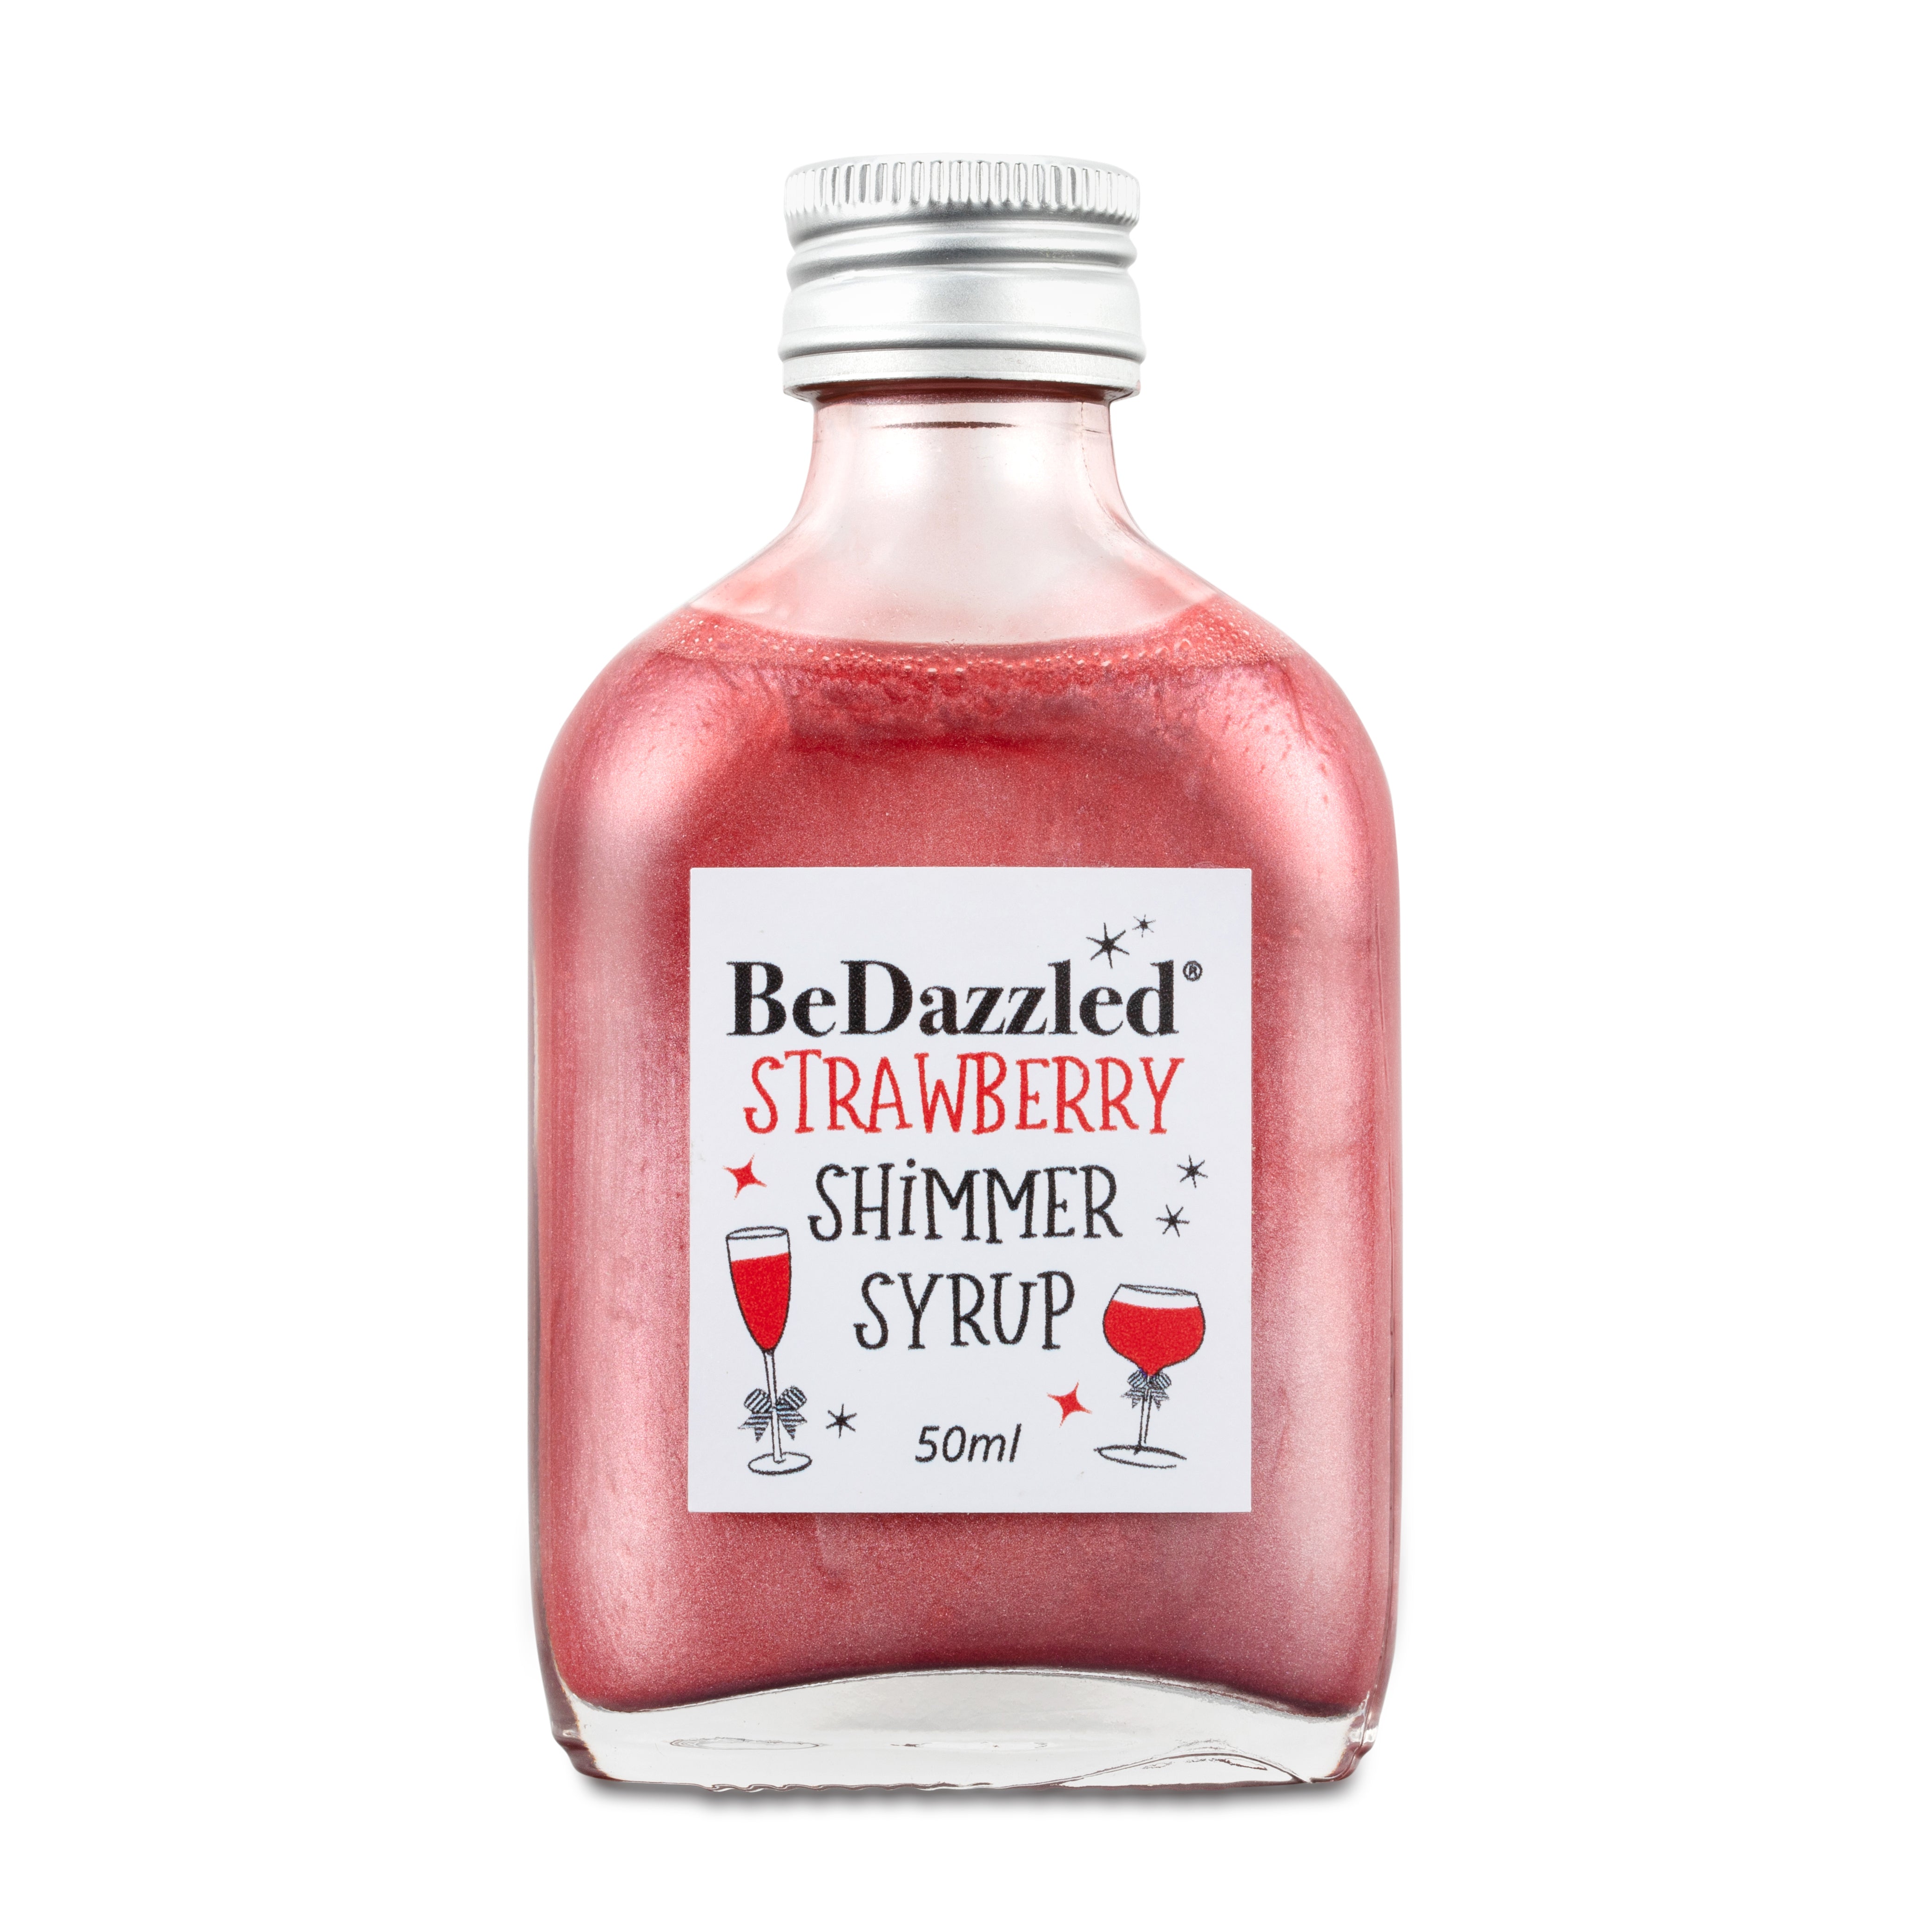 Strawberry Shimmer Syrup 50ml